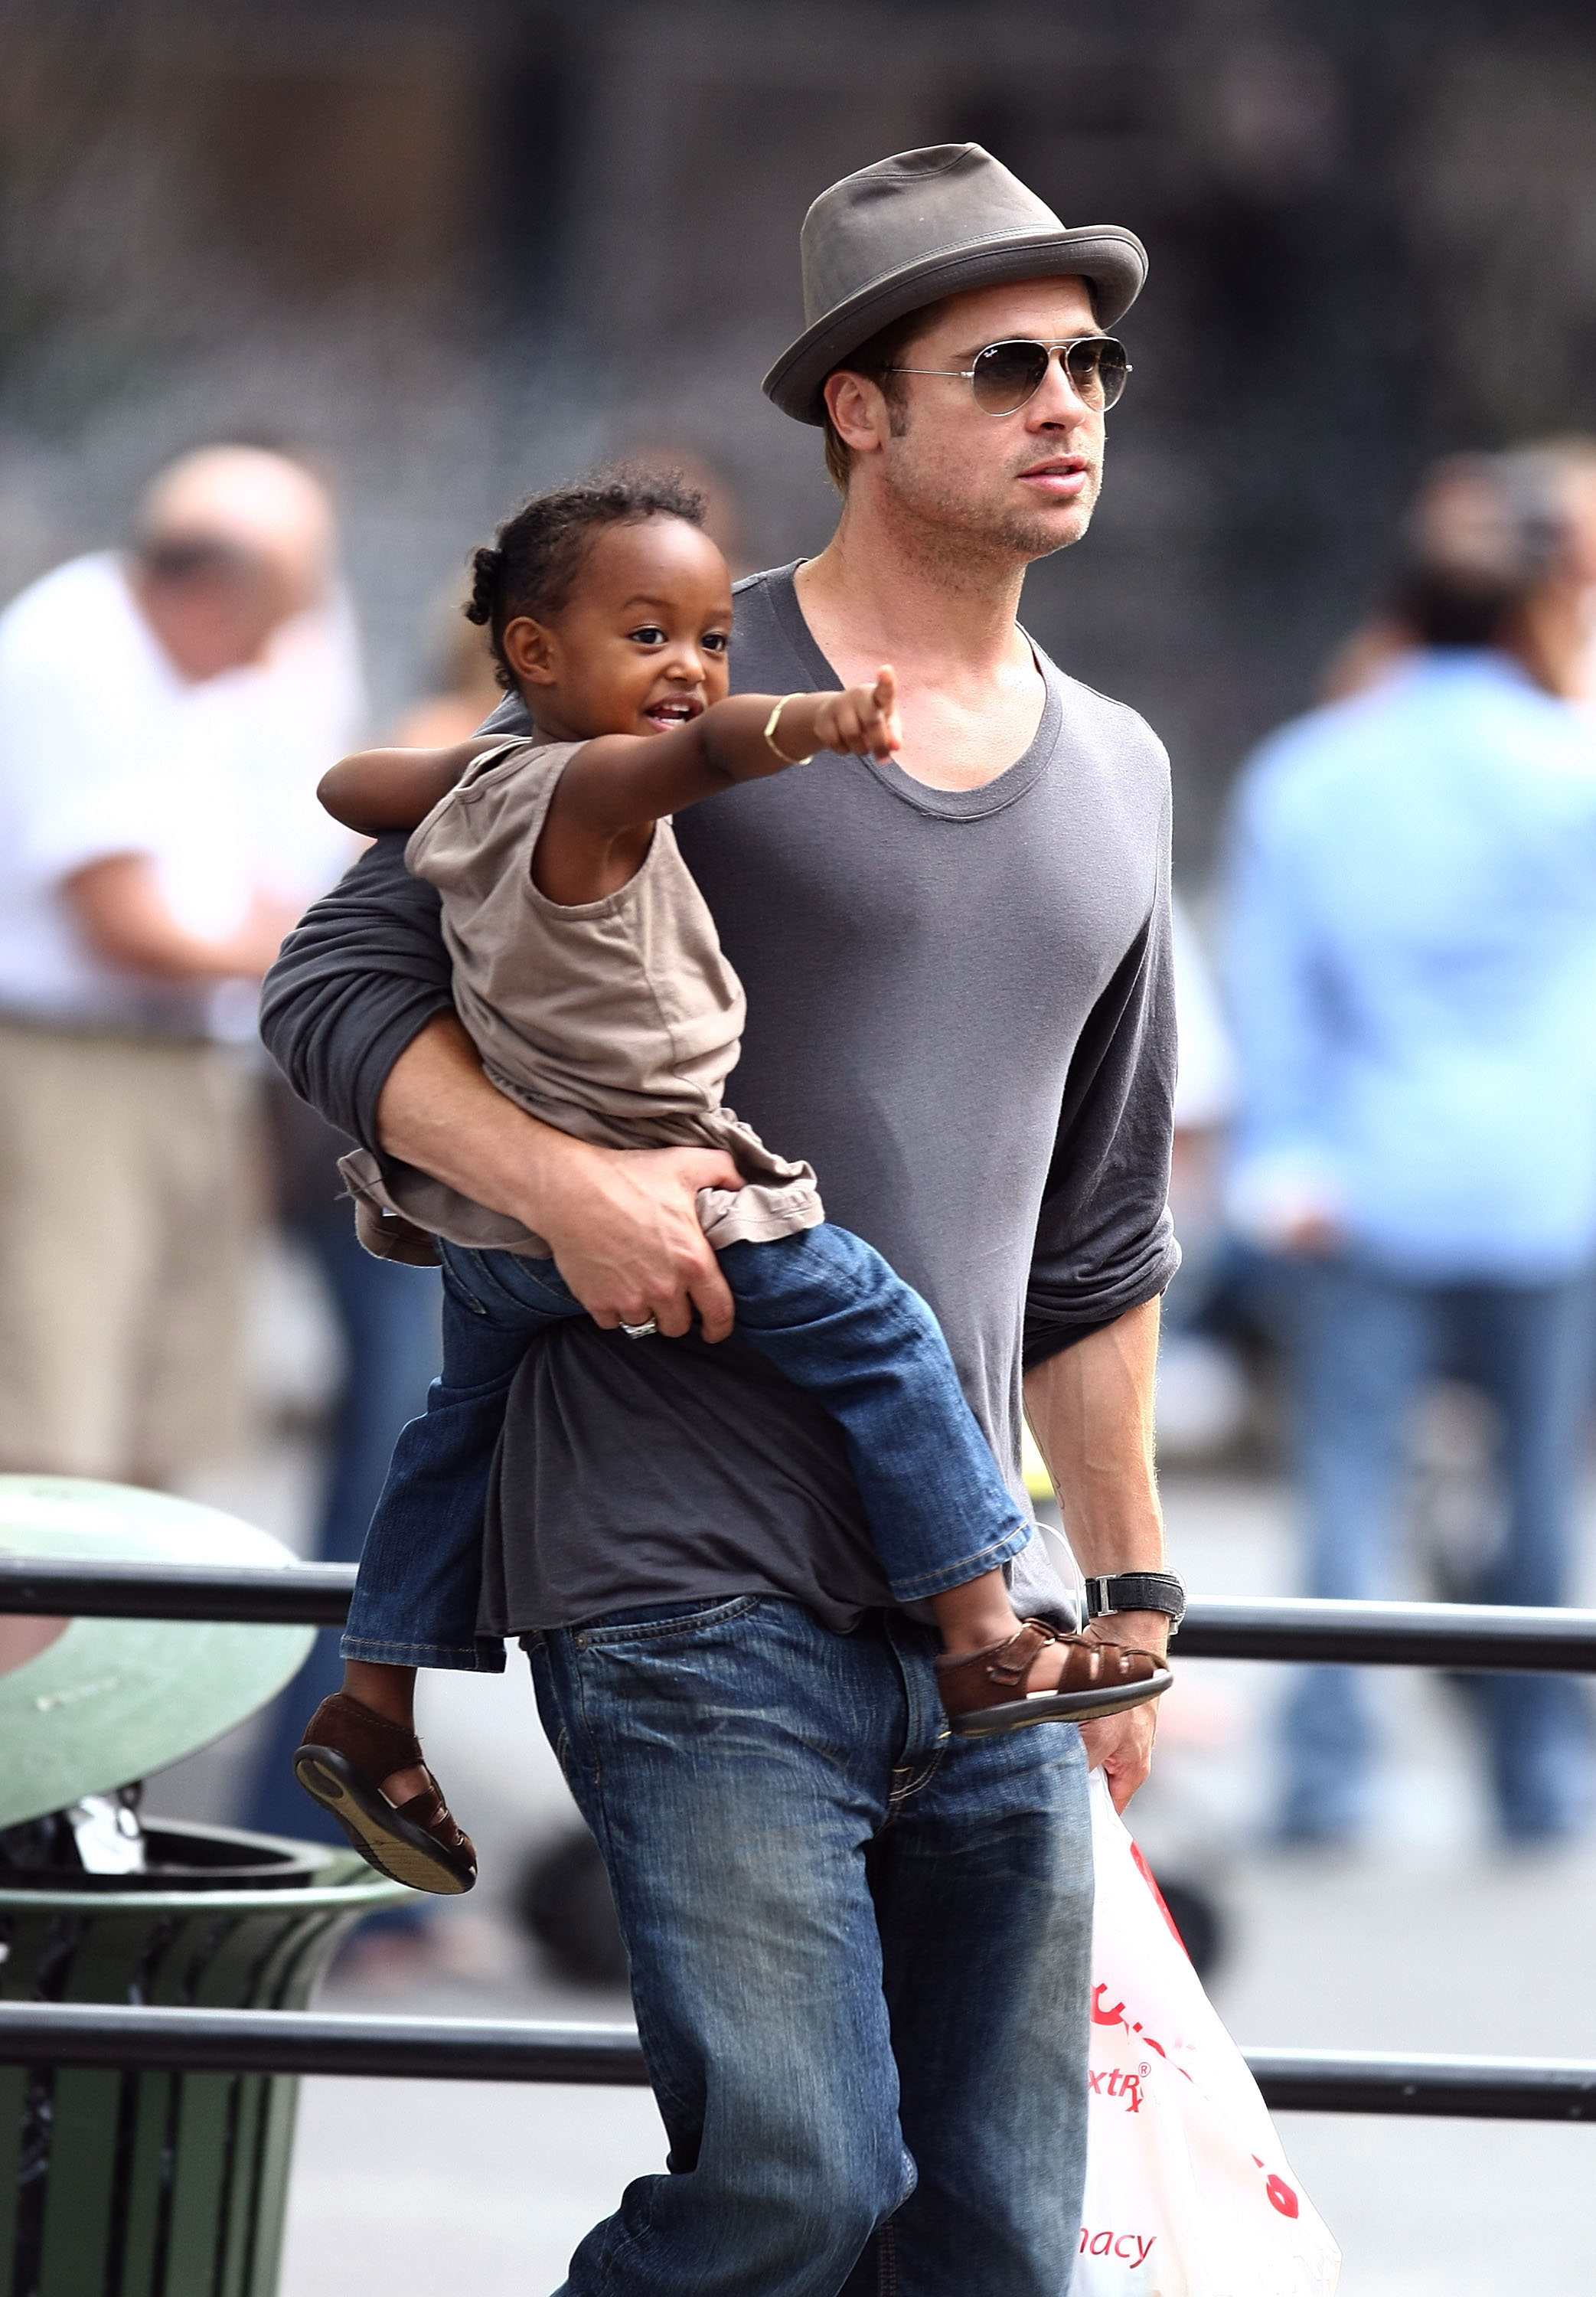 Brad Pitt and his daughter Zahara Jolie-Pitt spotted at a playground in New York City on August 26, 2007 | Source: Getty Images